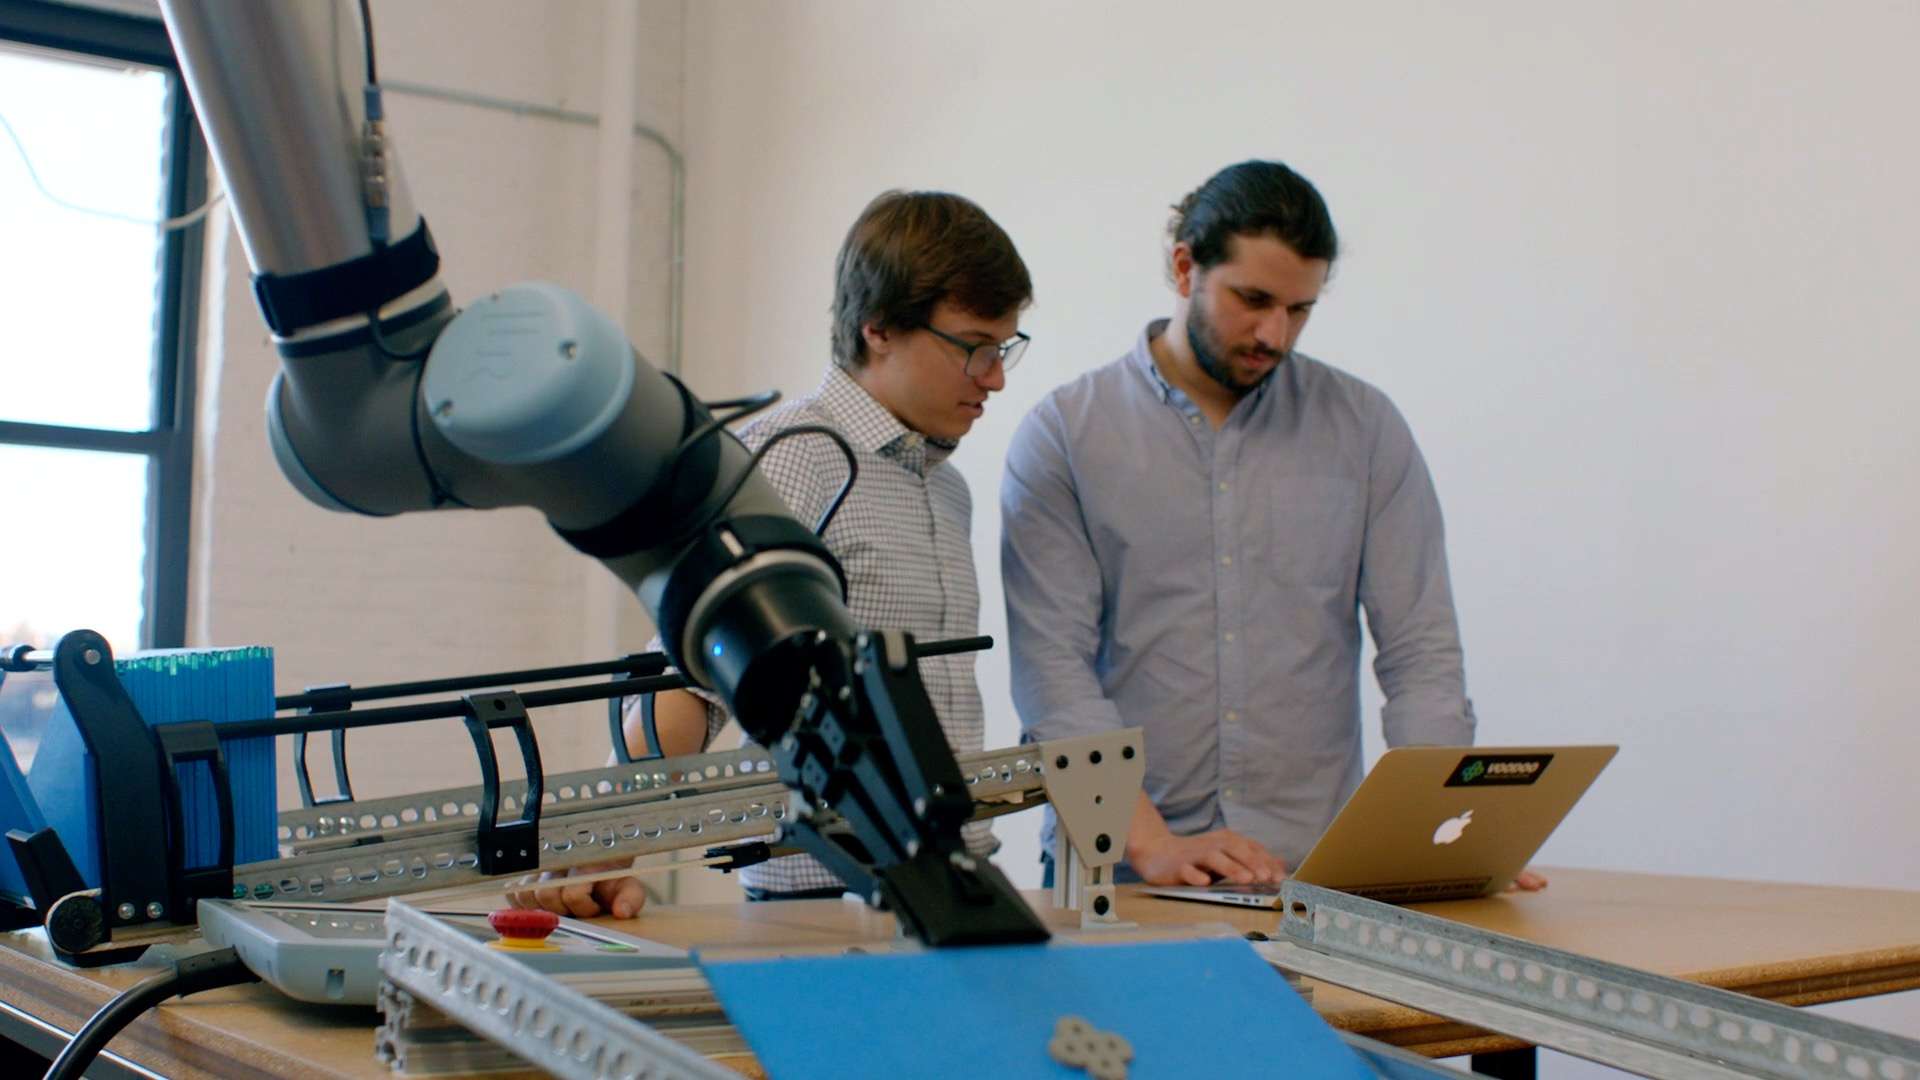 6 College Majors That Produce the Best Robotics Employees